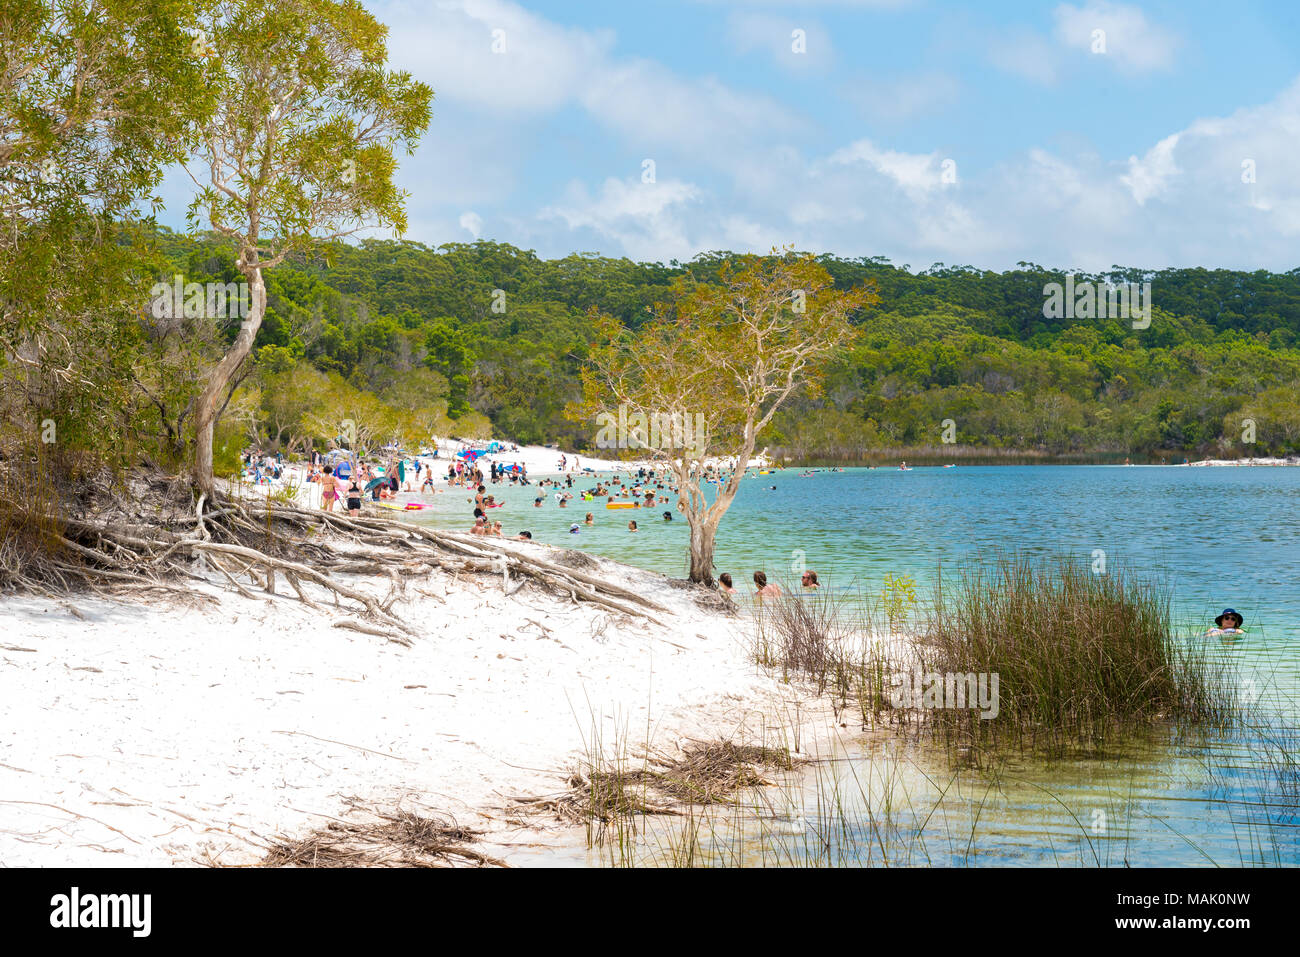 Fraser Island, QLD, Australia - December 31, 2017: People at the beach at Lake McKenzie, one of the popular freshwater lake at Fraser Island Stock Photo